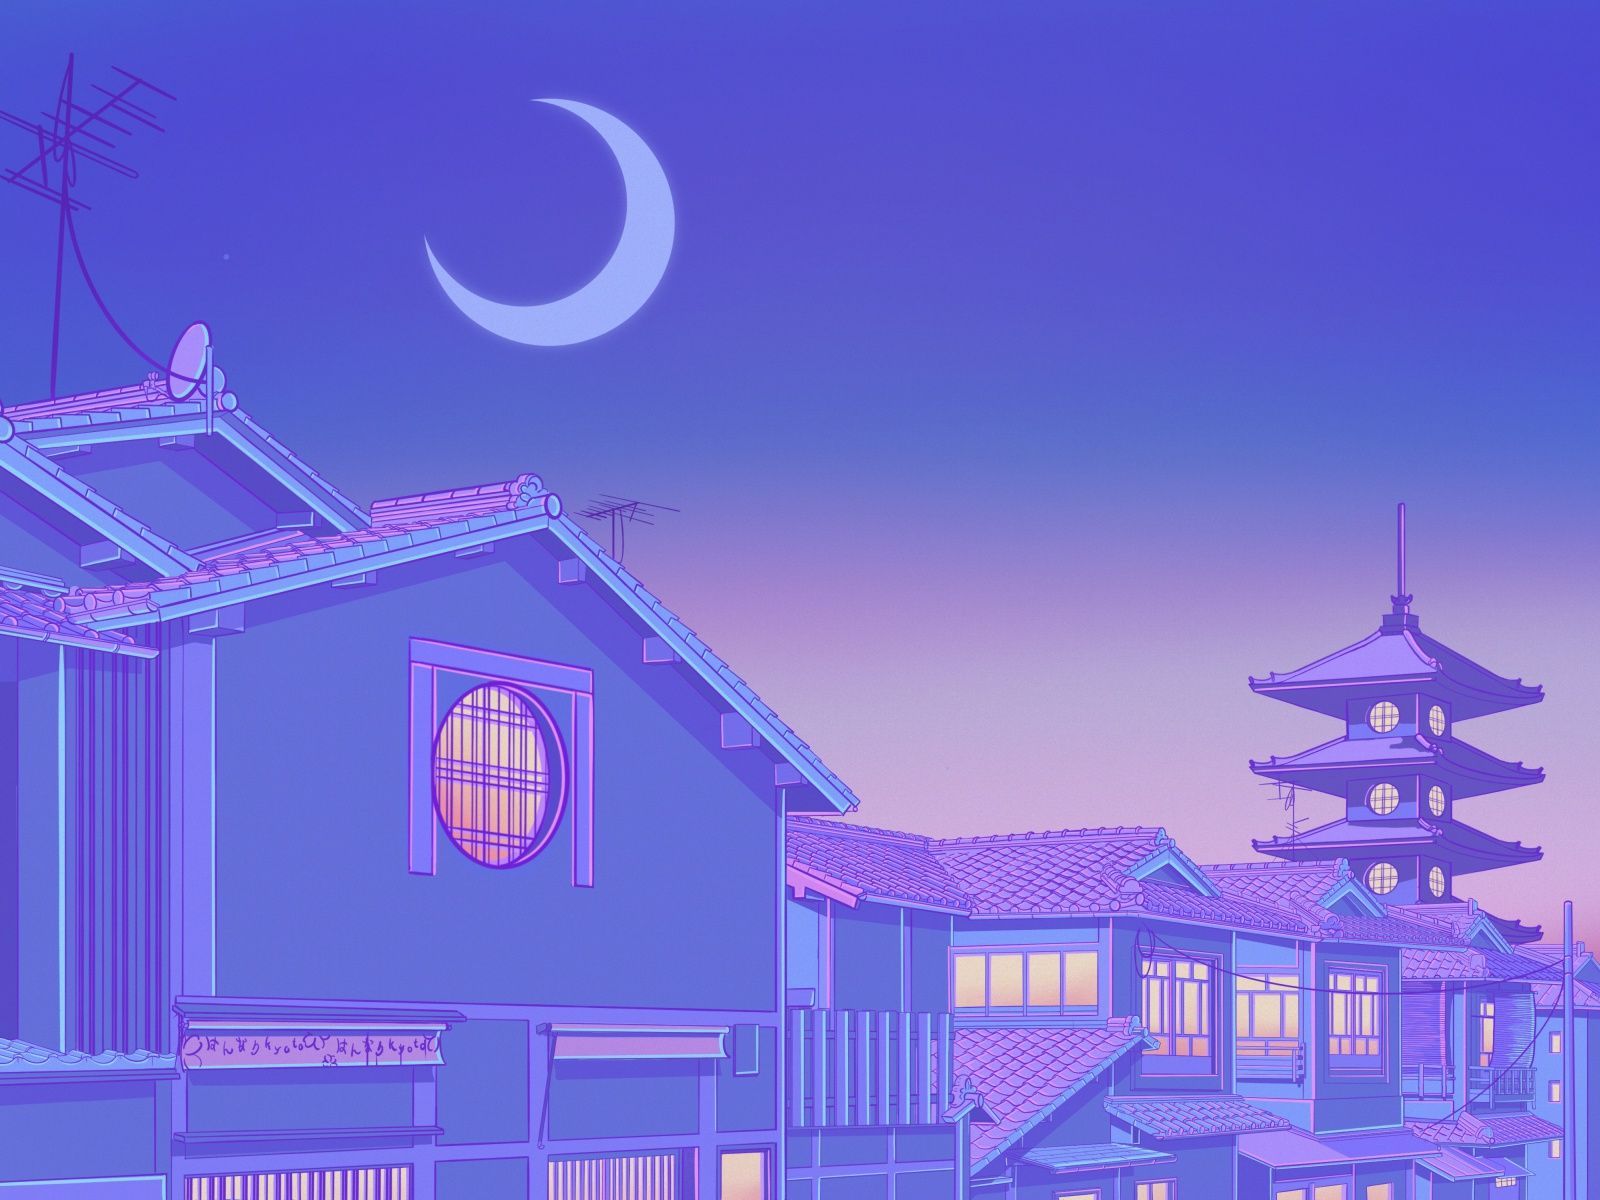 A blue building with the moon in it - Japan